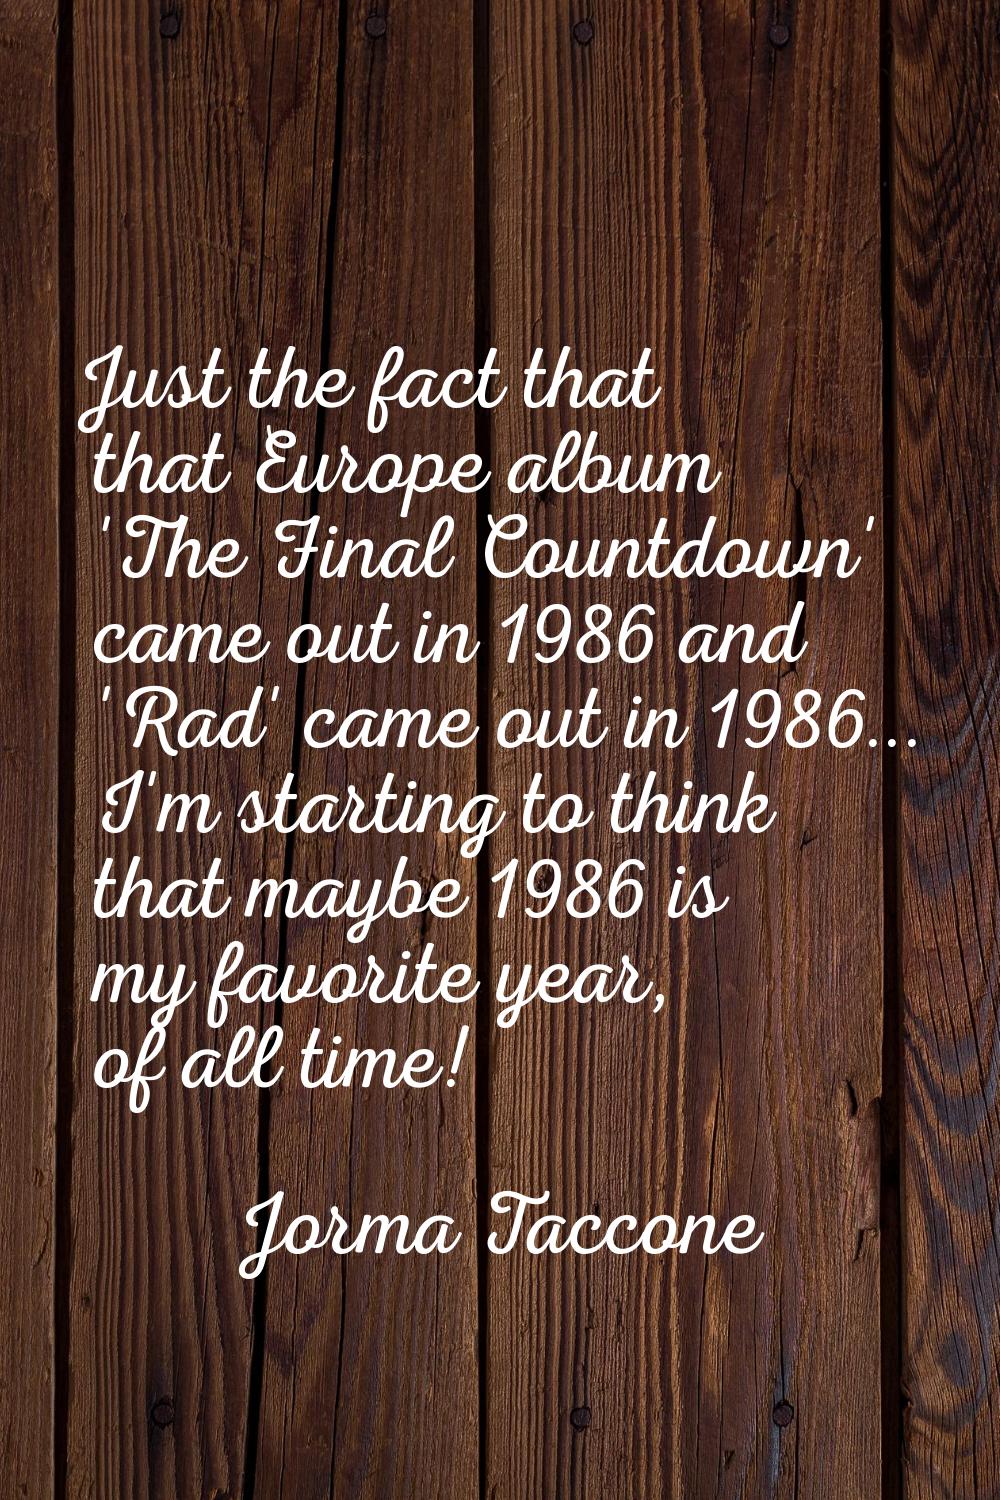 Just the fact that that Europe album 'The Final Countdown' came out in 1986 and 'Rad' came out in 1